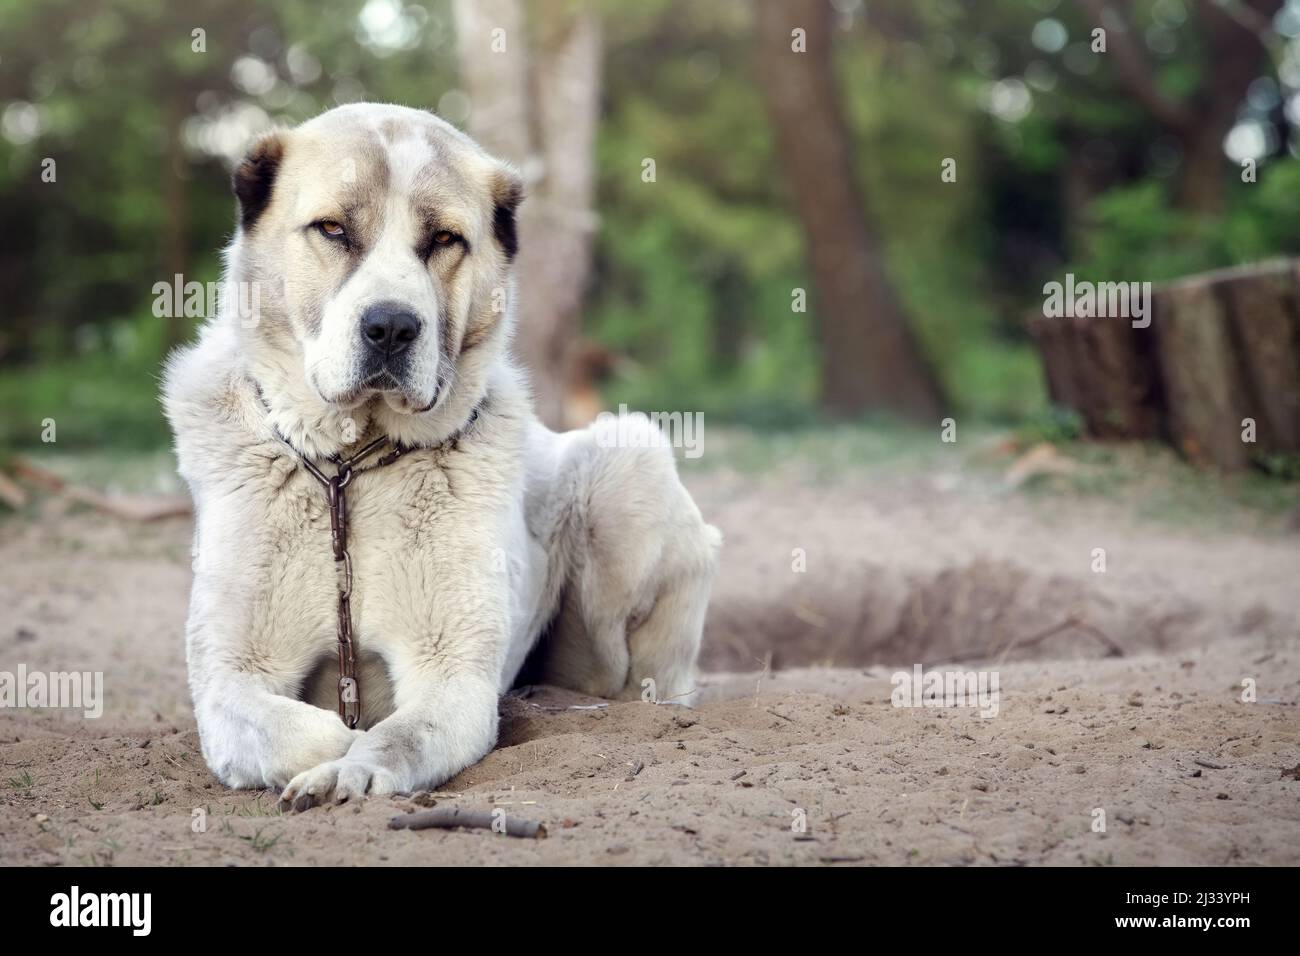 A white dog lies and looks at the camera with curiosity. Watchdog Central Asian Shepherd. Stock Photo